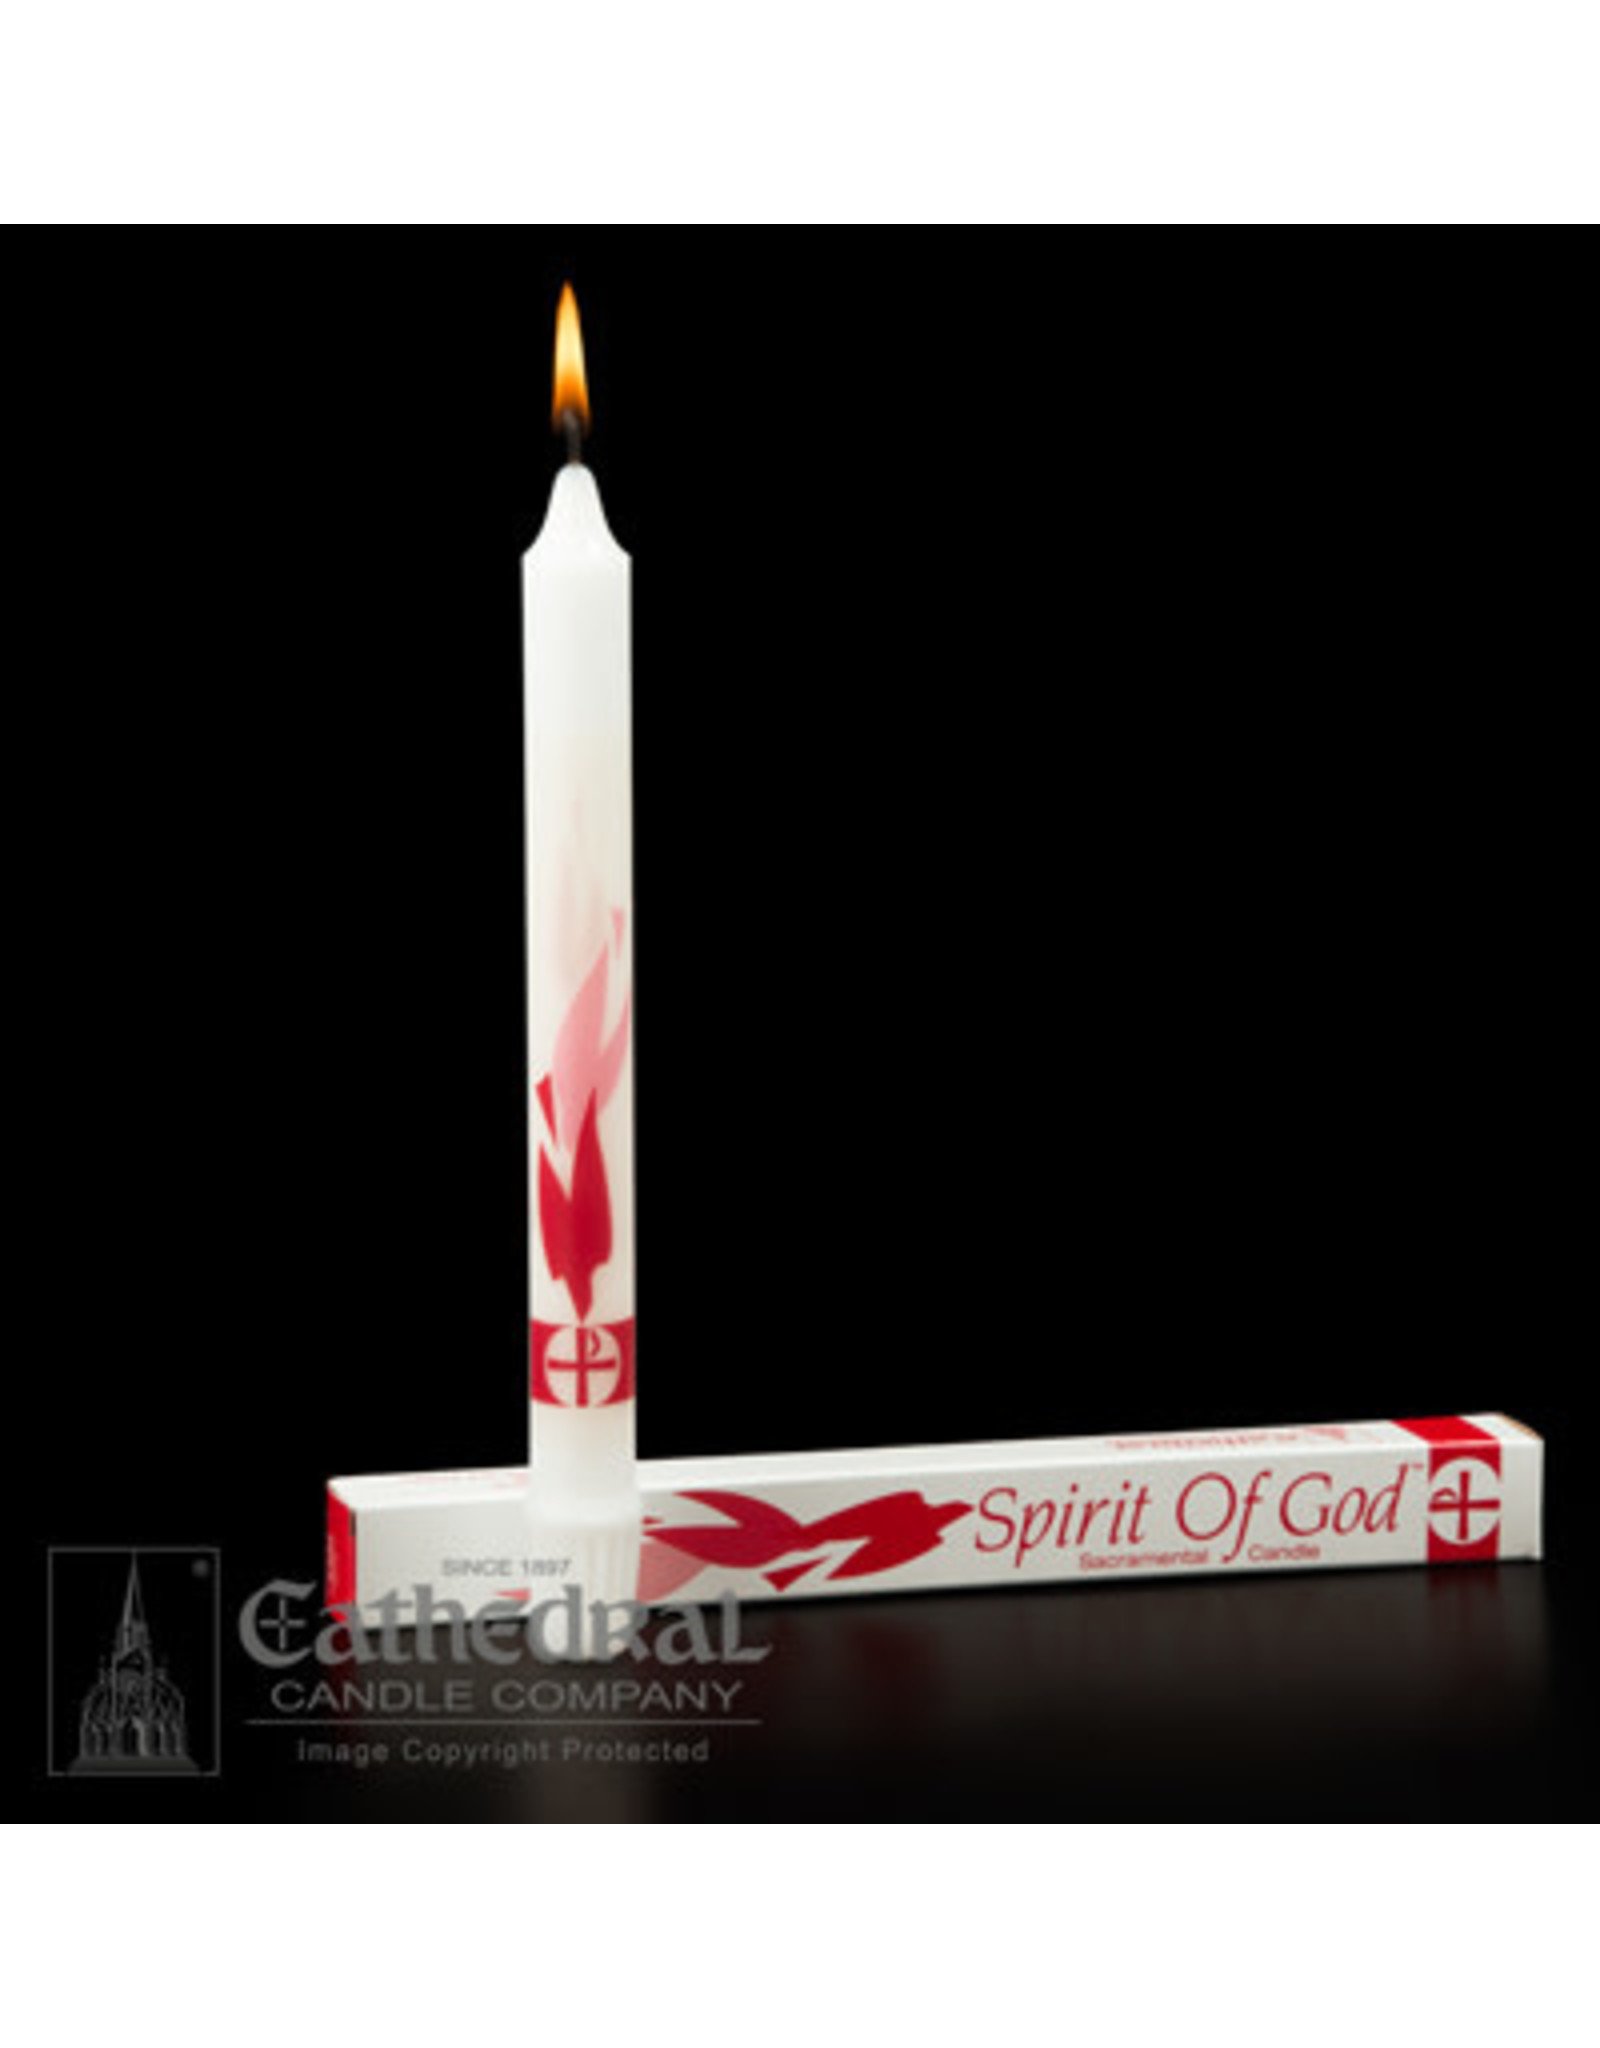 Cathedral Candle Confirmation Candle - Spirit of God